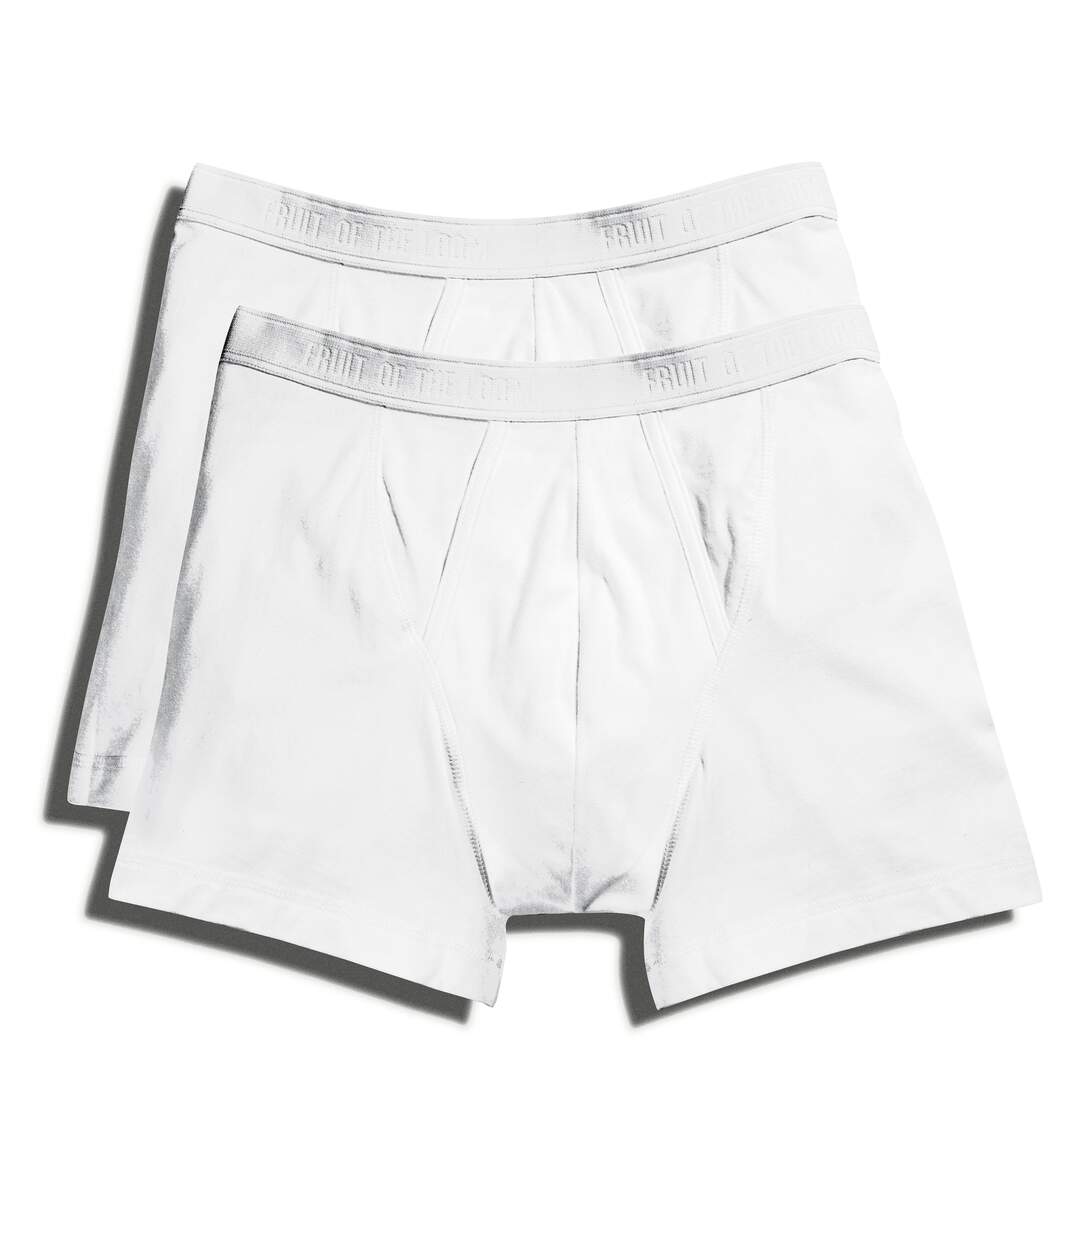 Fruit Of The Loom - Boxers CLASSIC - Homme (Blanc) - UTBC3358